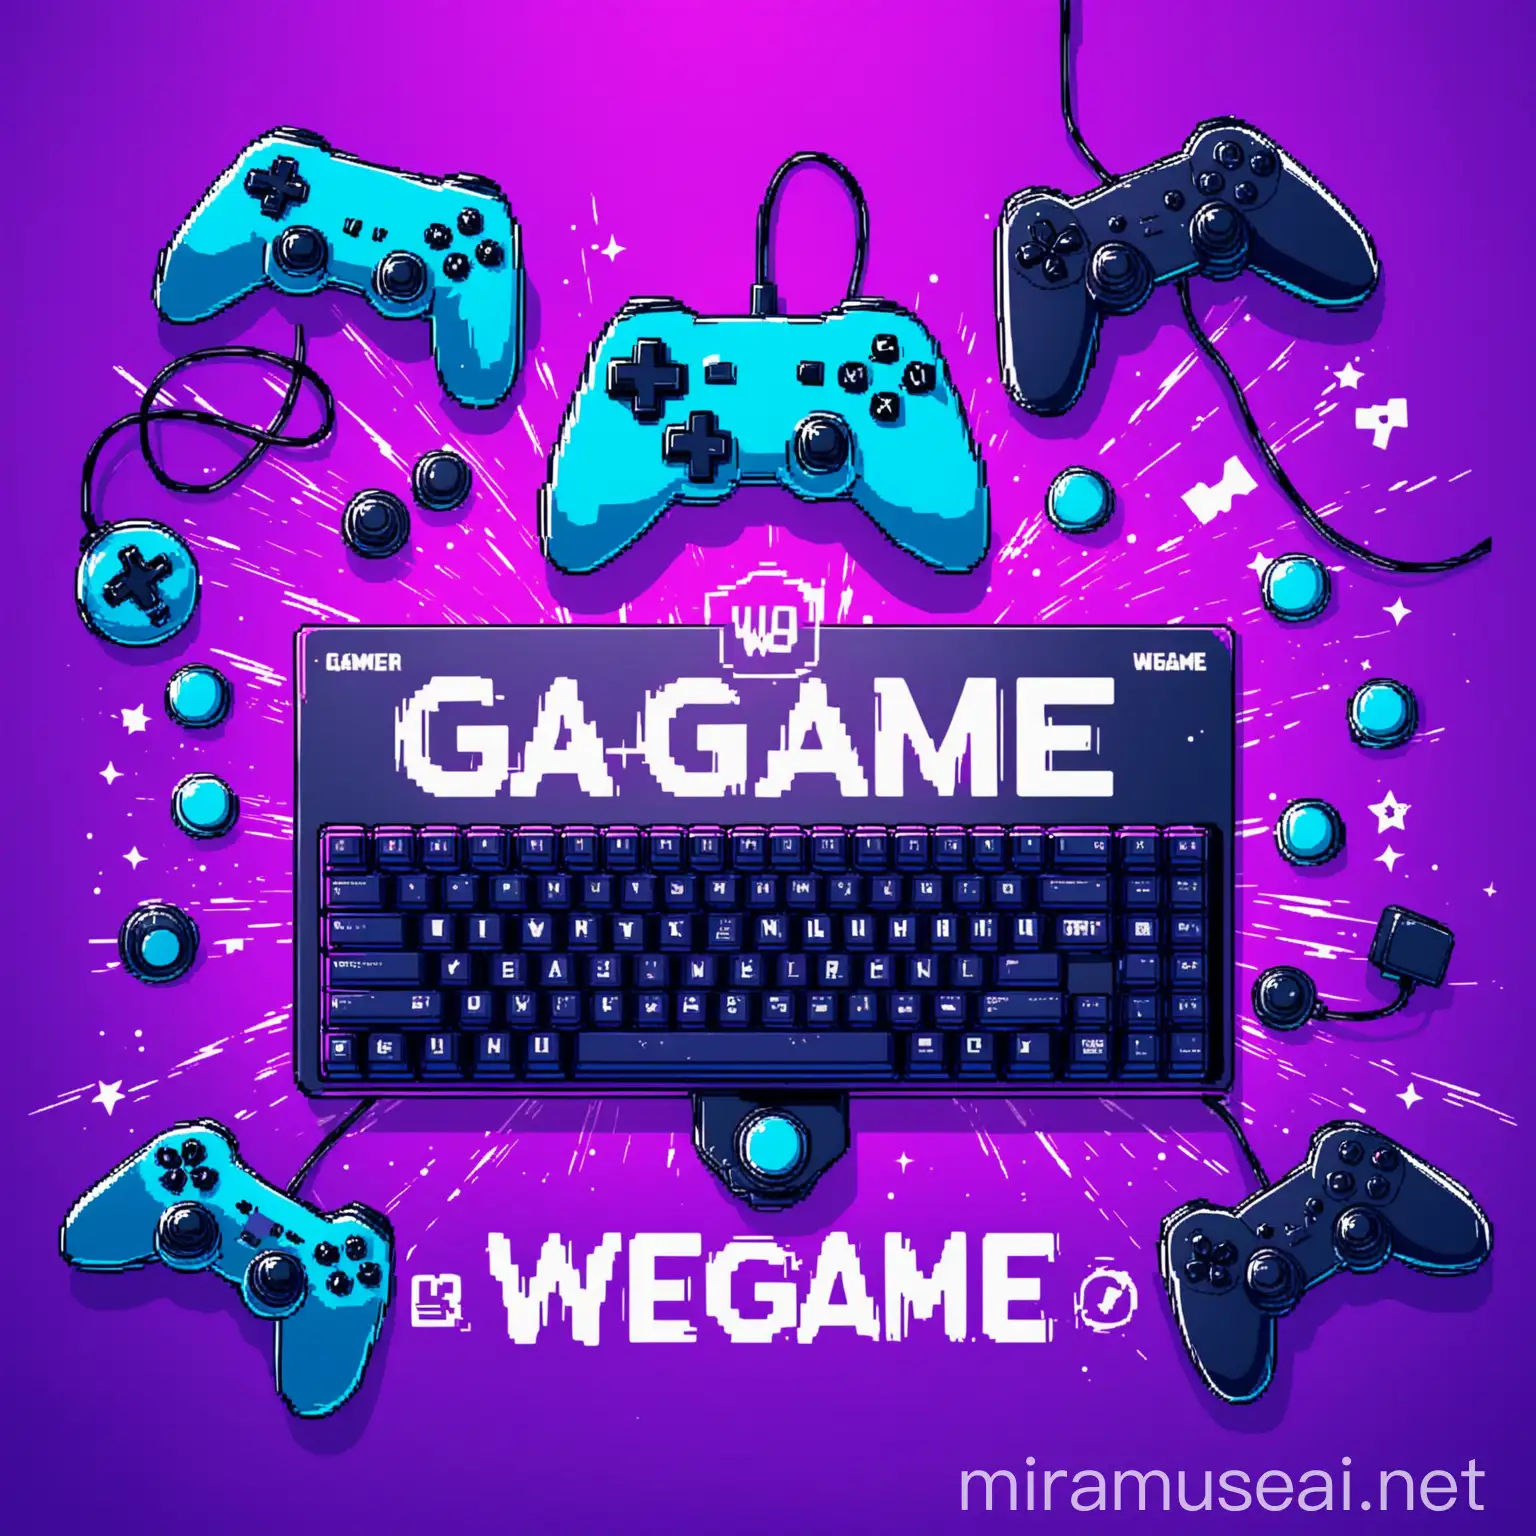 Online Gamers with Joysticks and Keyboards on Purple and Blue Background